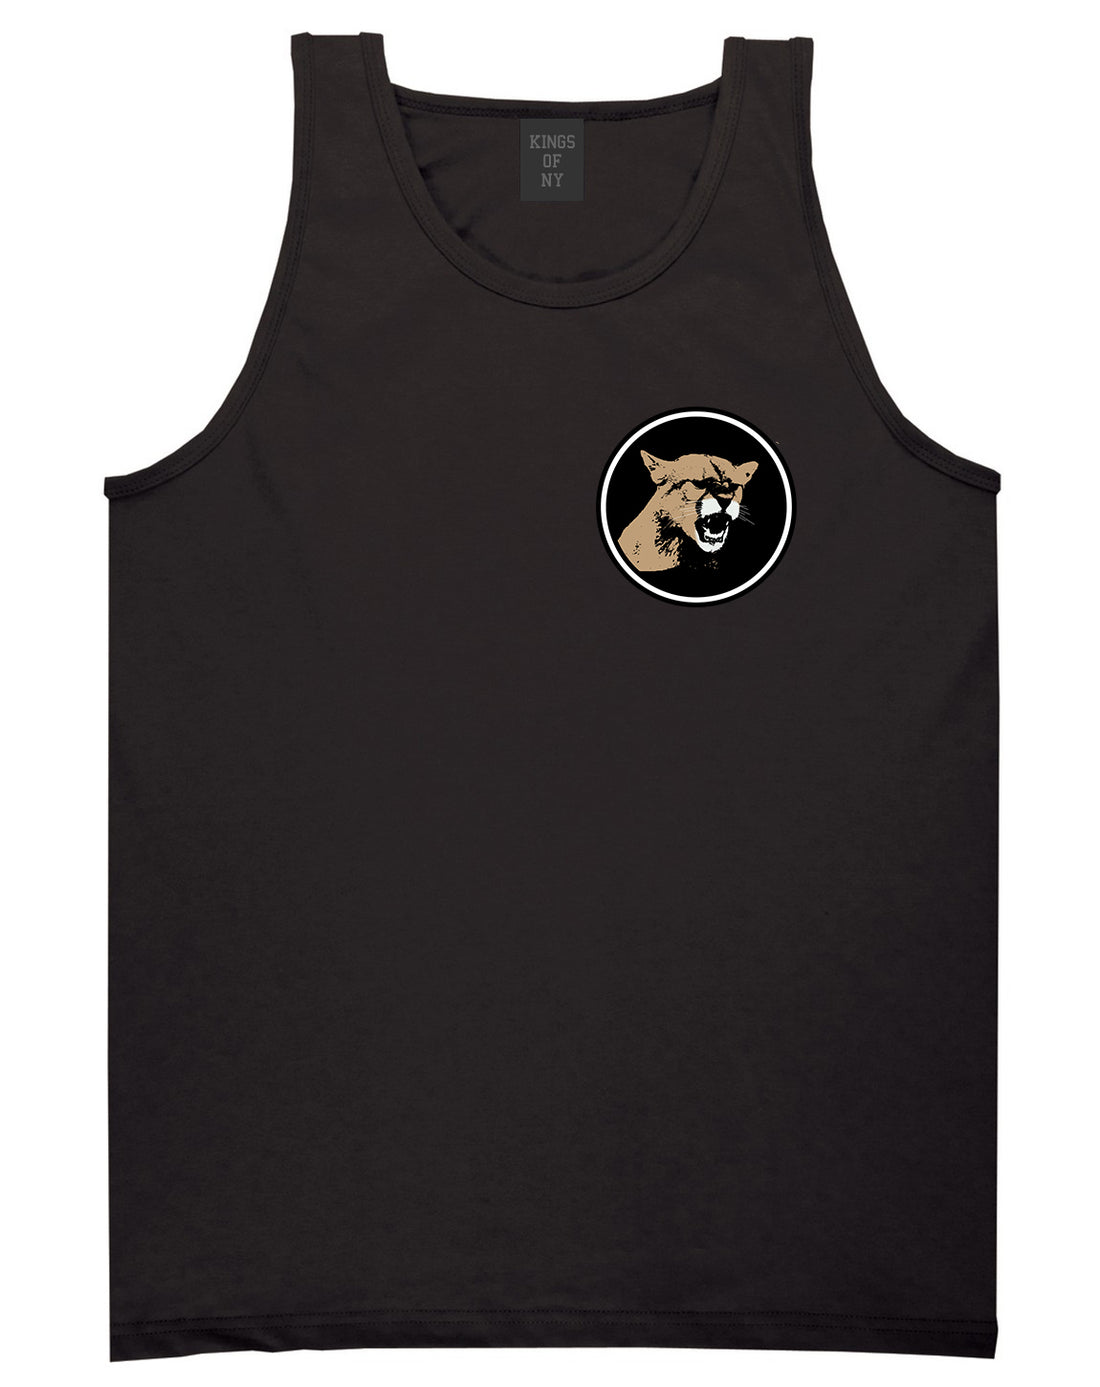 Angry Cougar Chest Black Tank Top Shirt by Kings Of NY